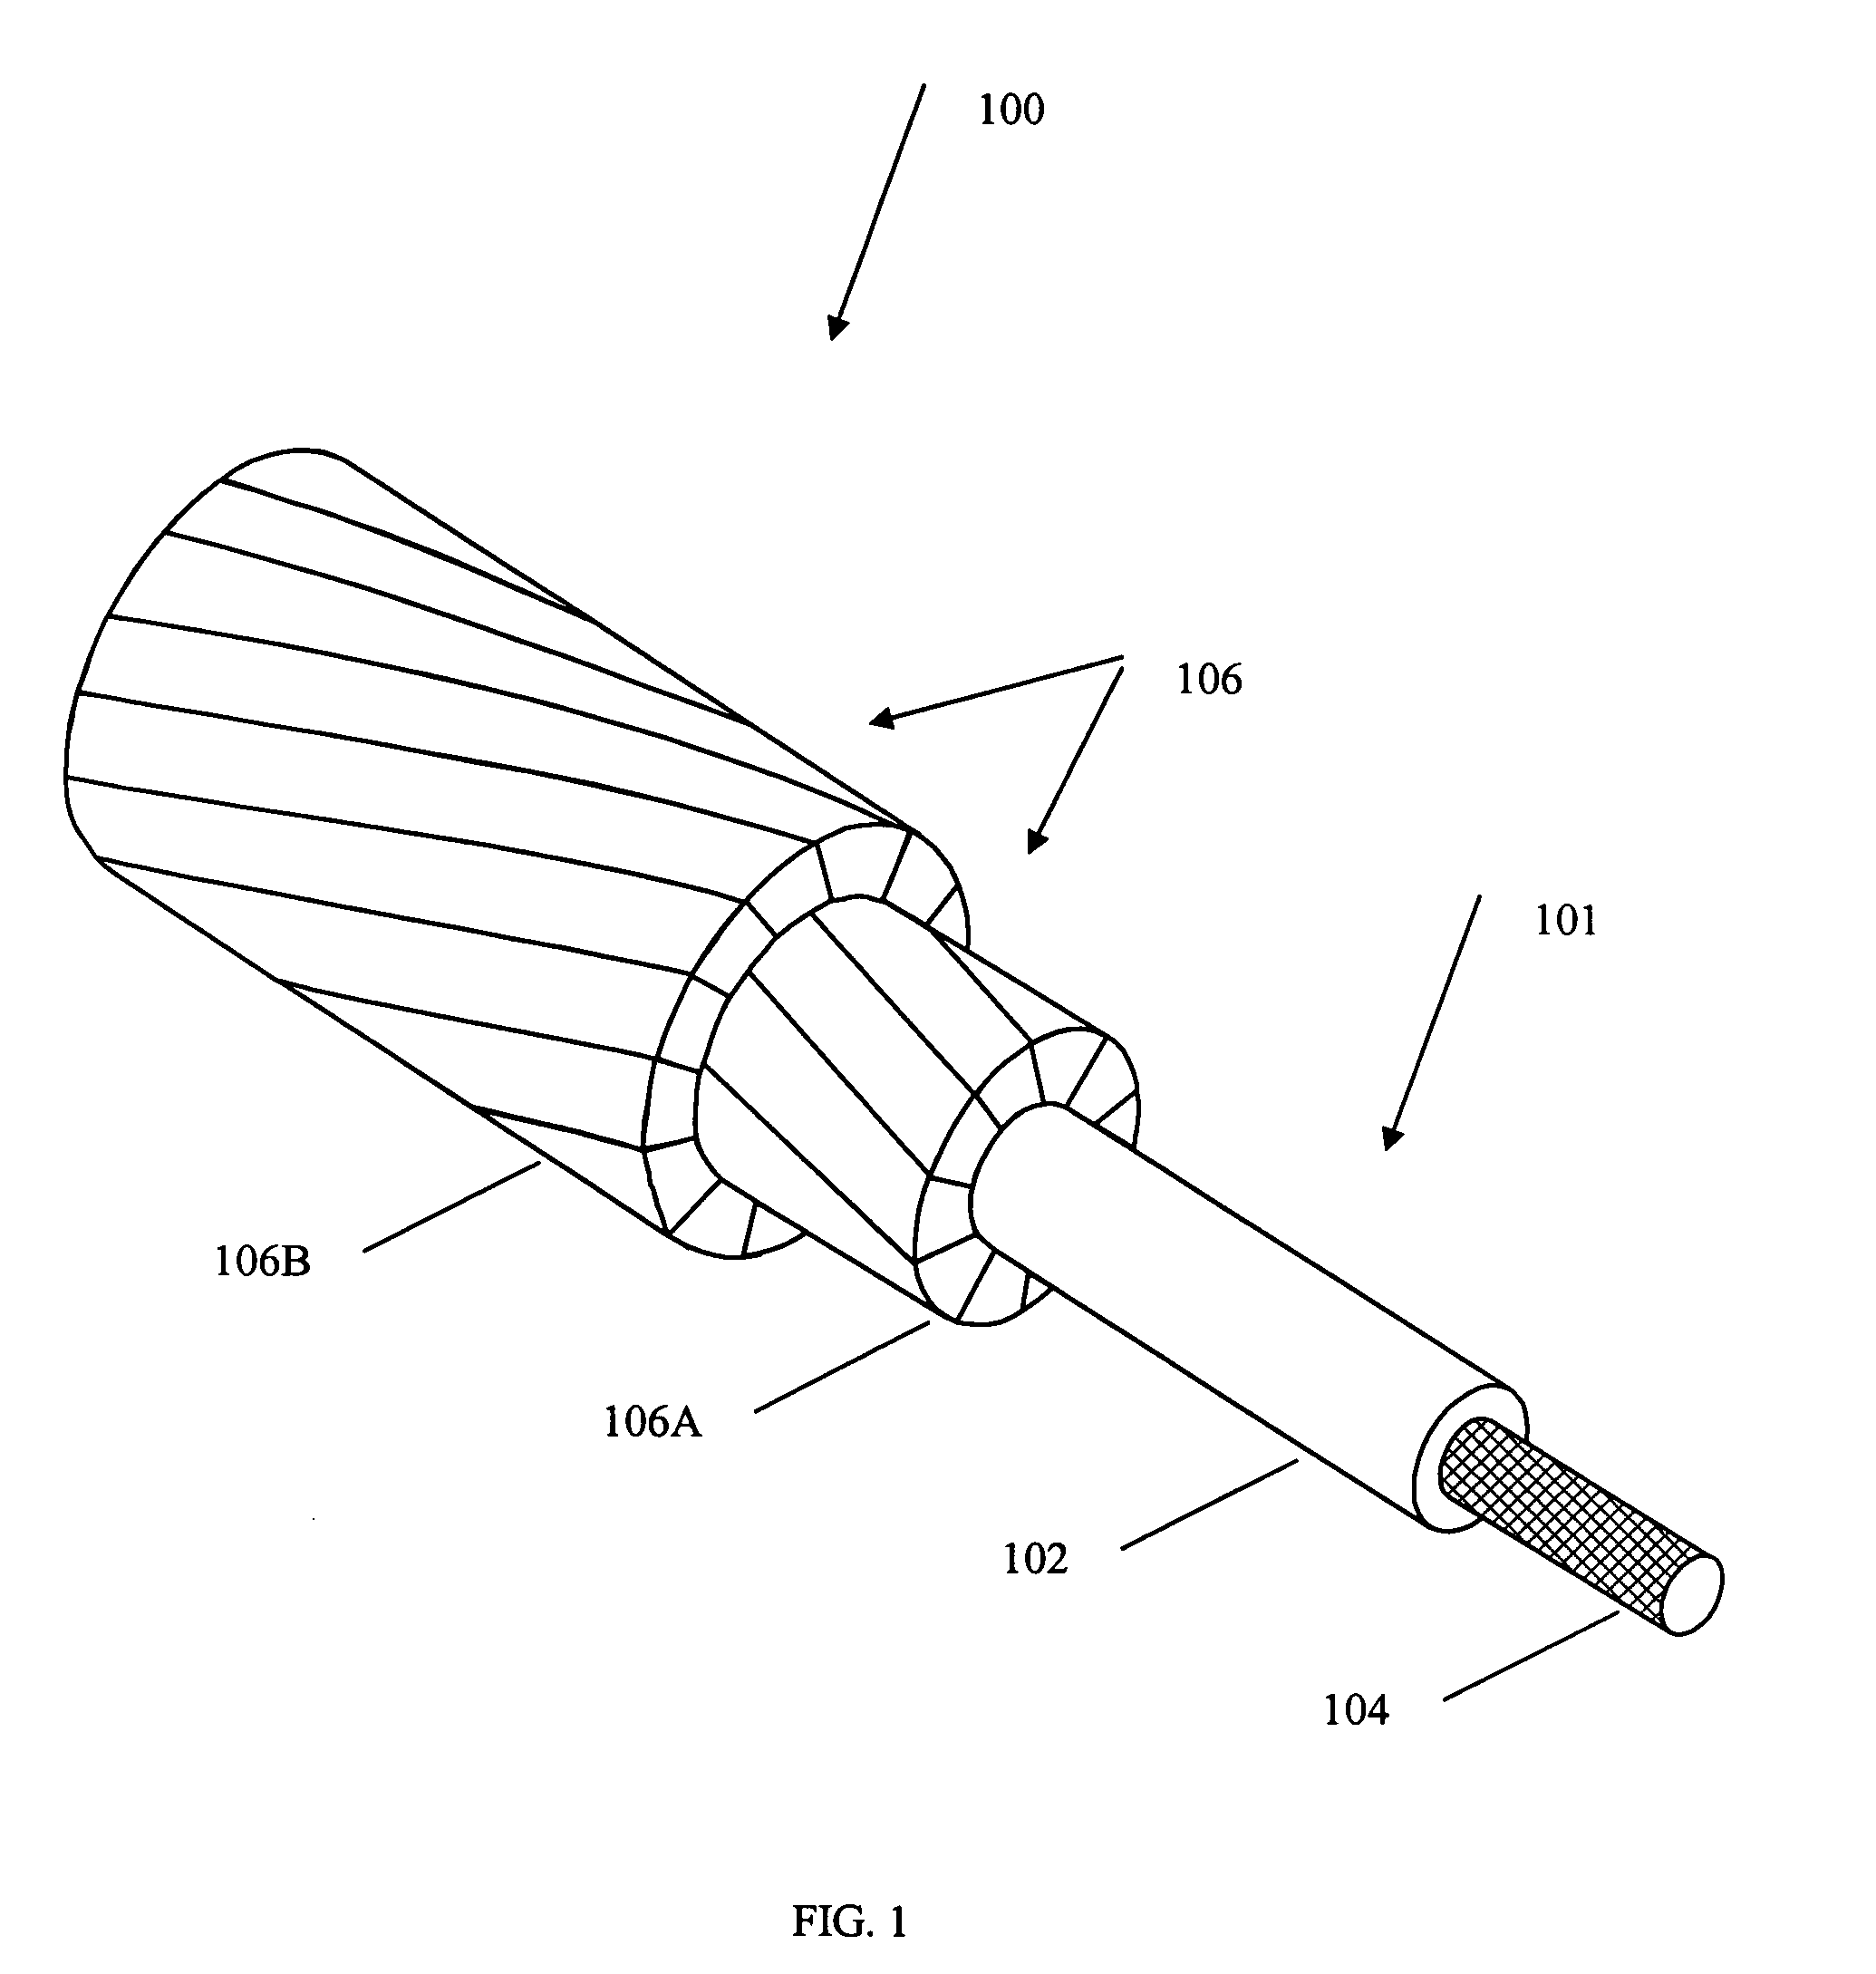 Collet-type splice and dead end use with an aluminum conductor composite core reinforced cable